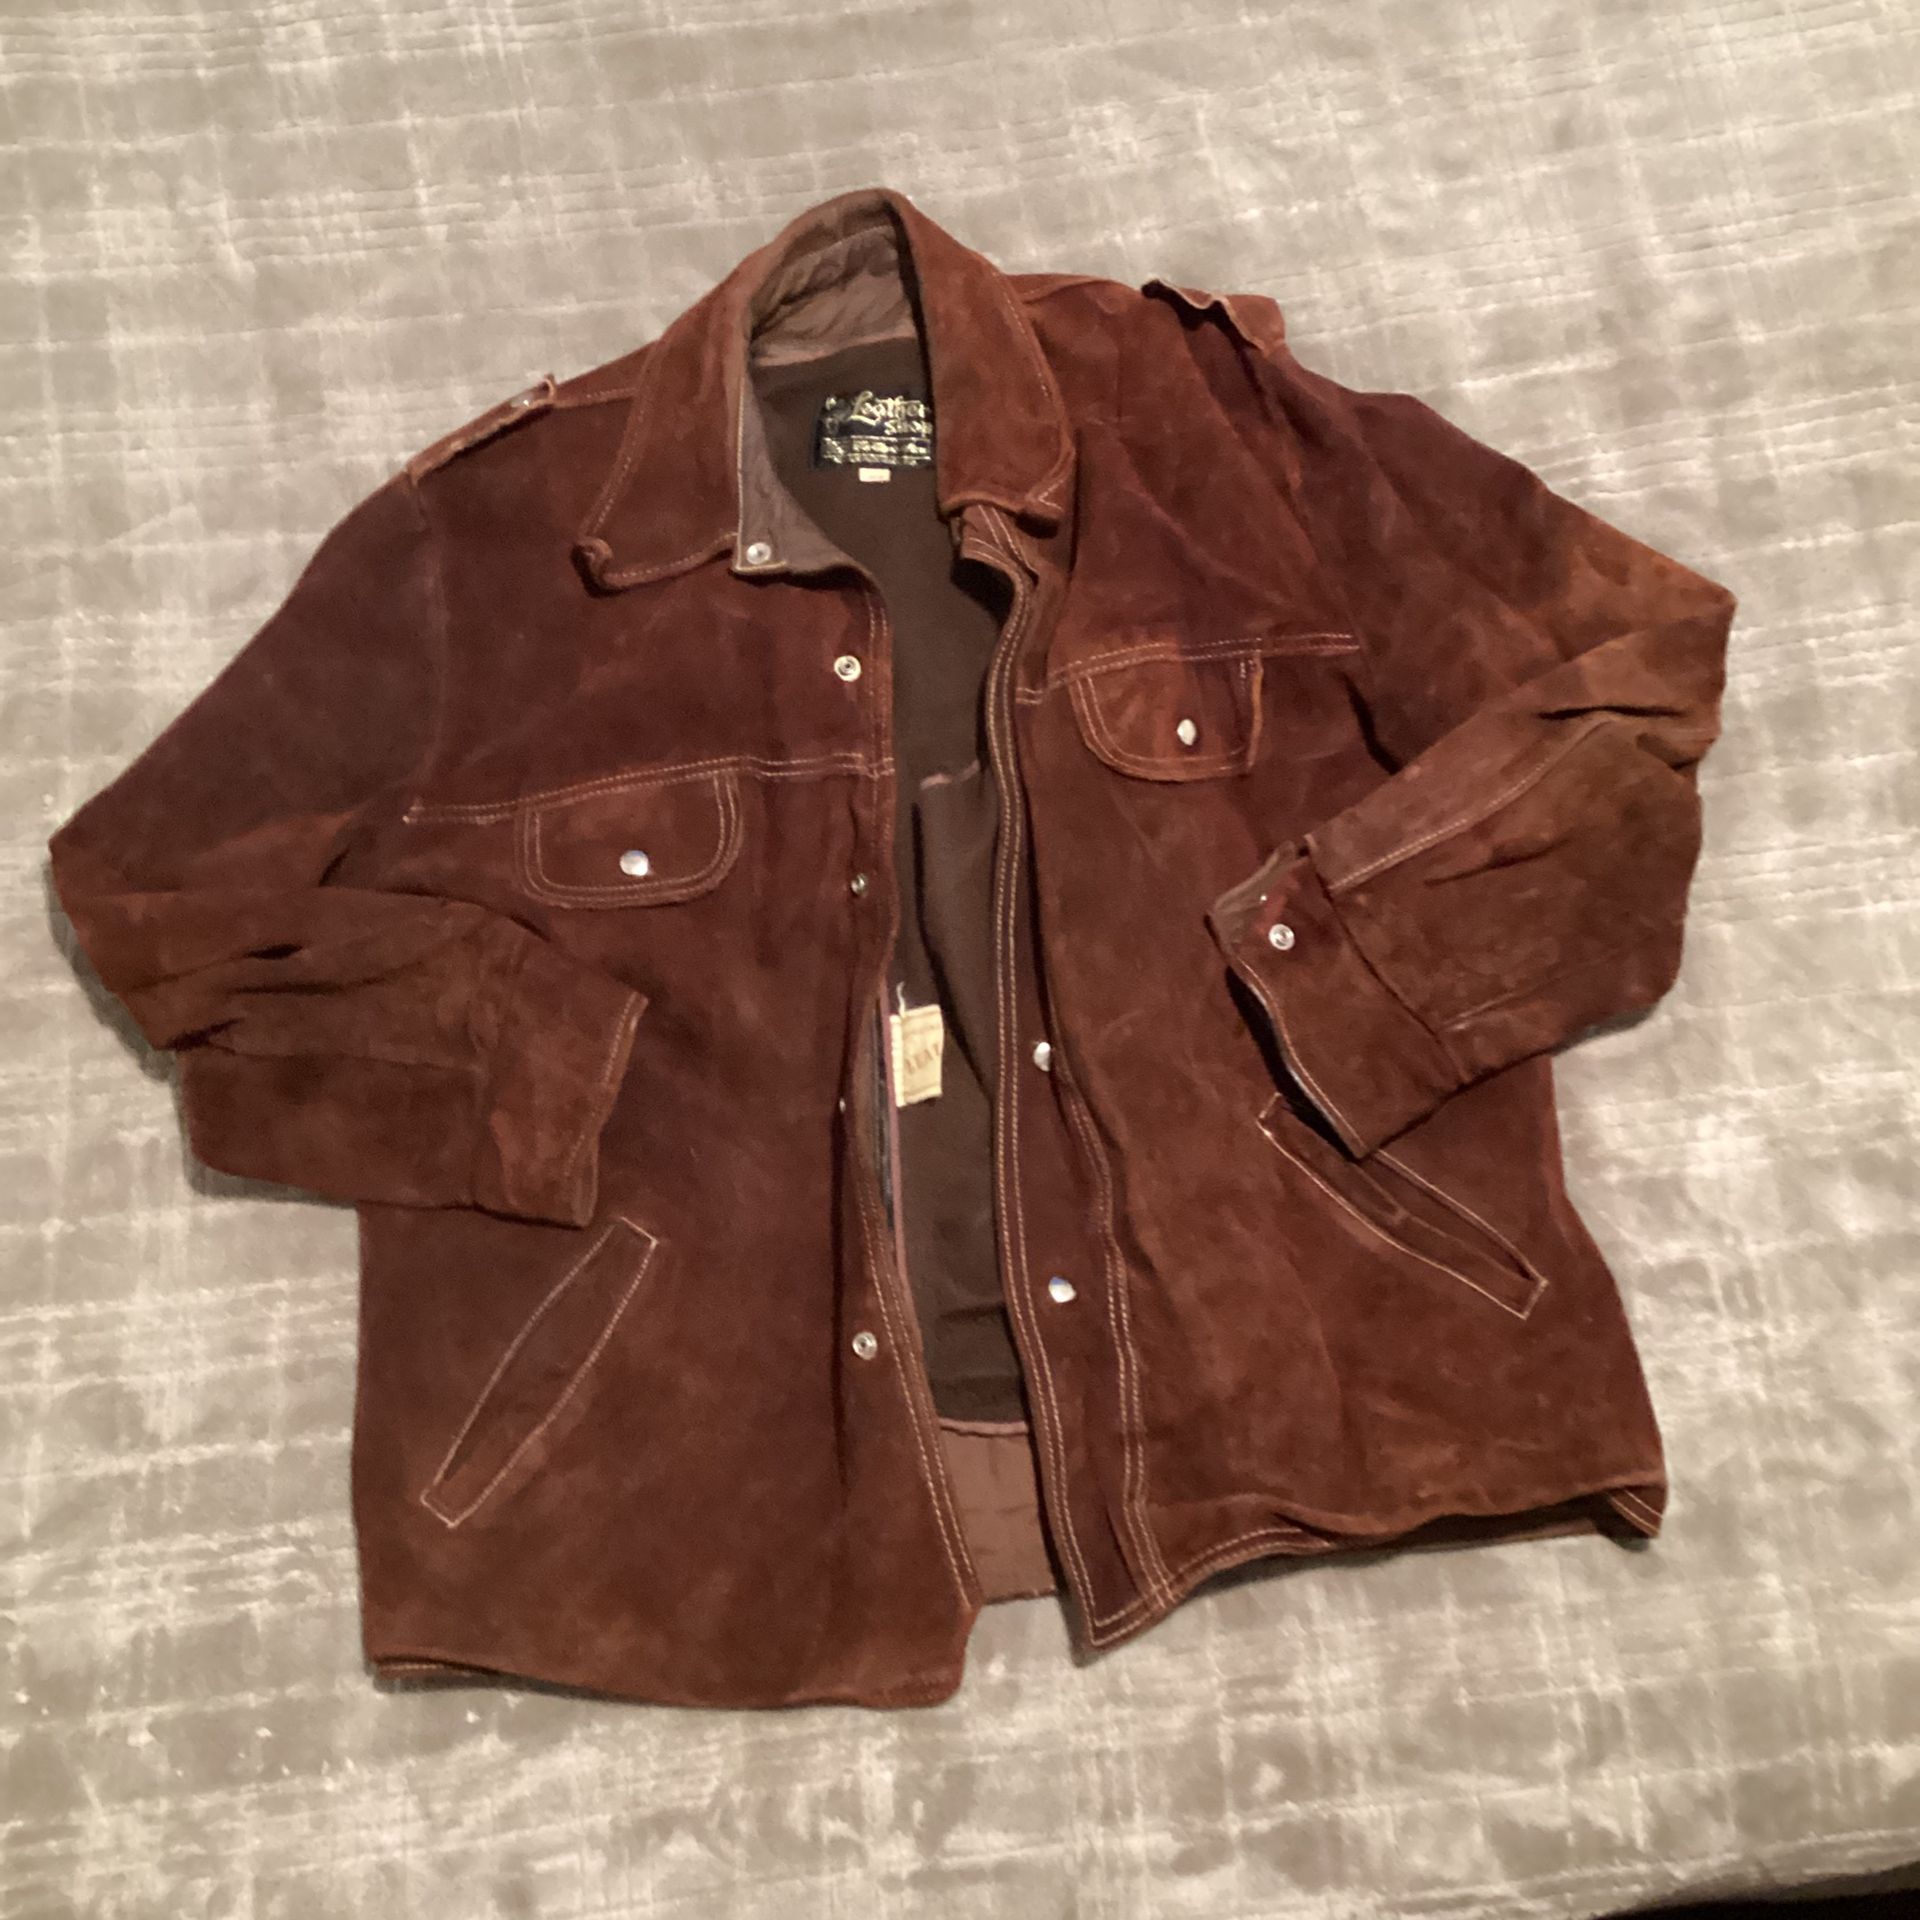 size 44 Beautiful100% ALL LEATHER Men’s JACKET